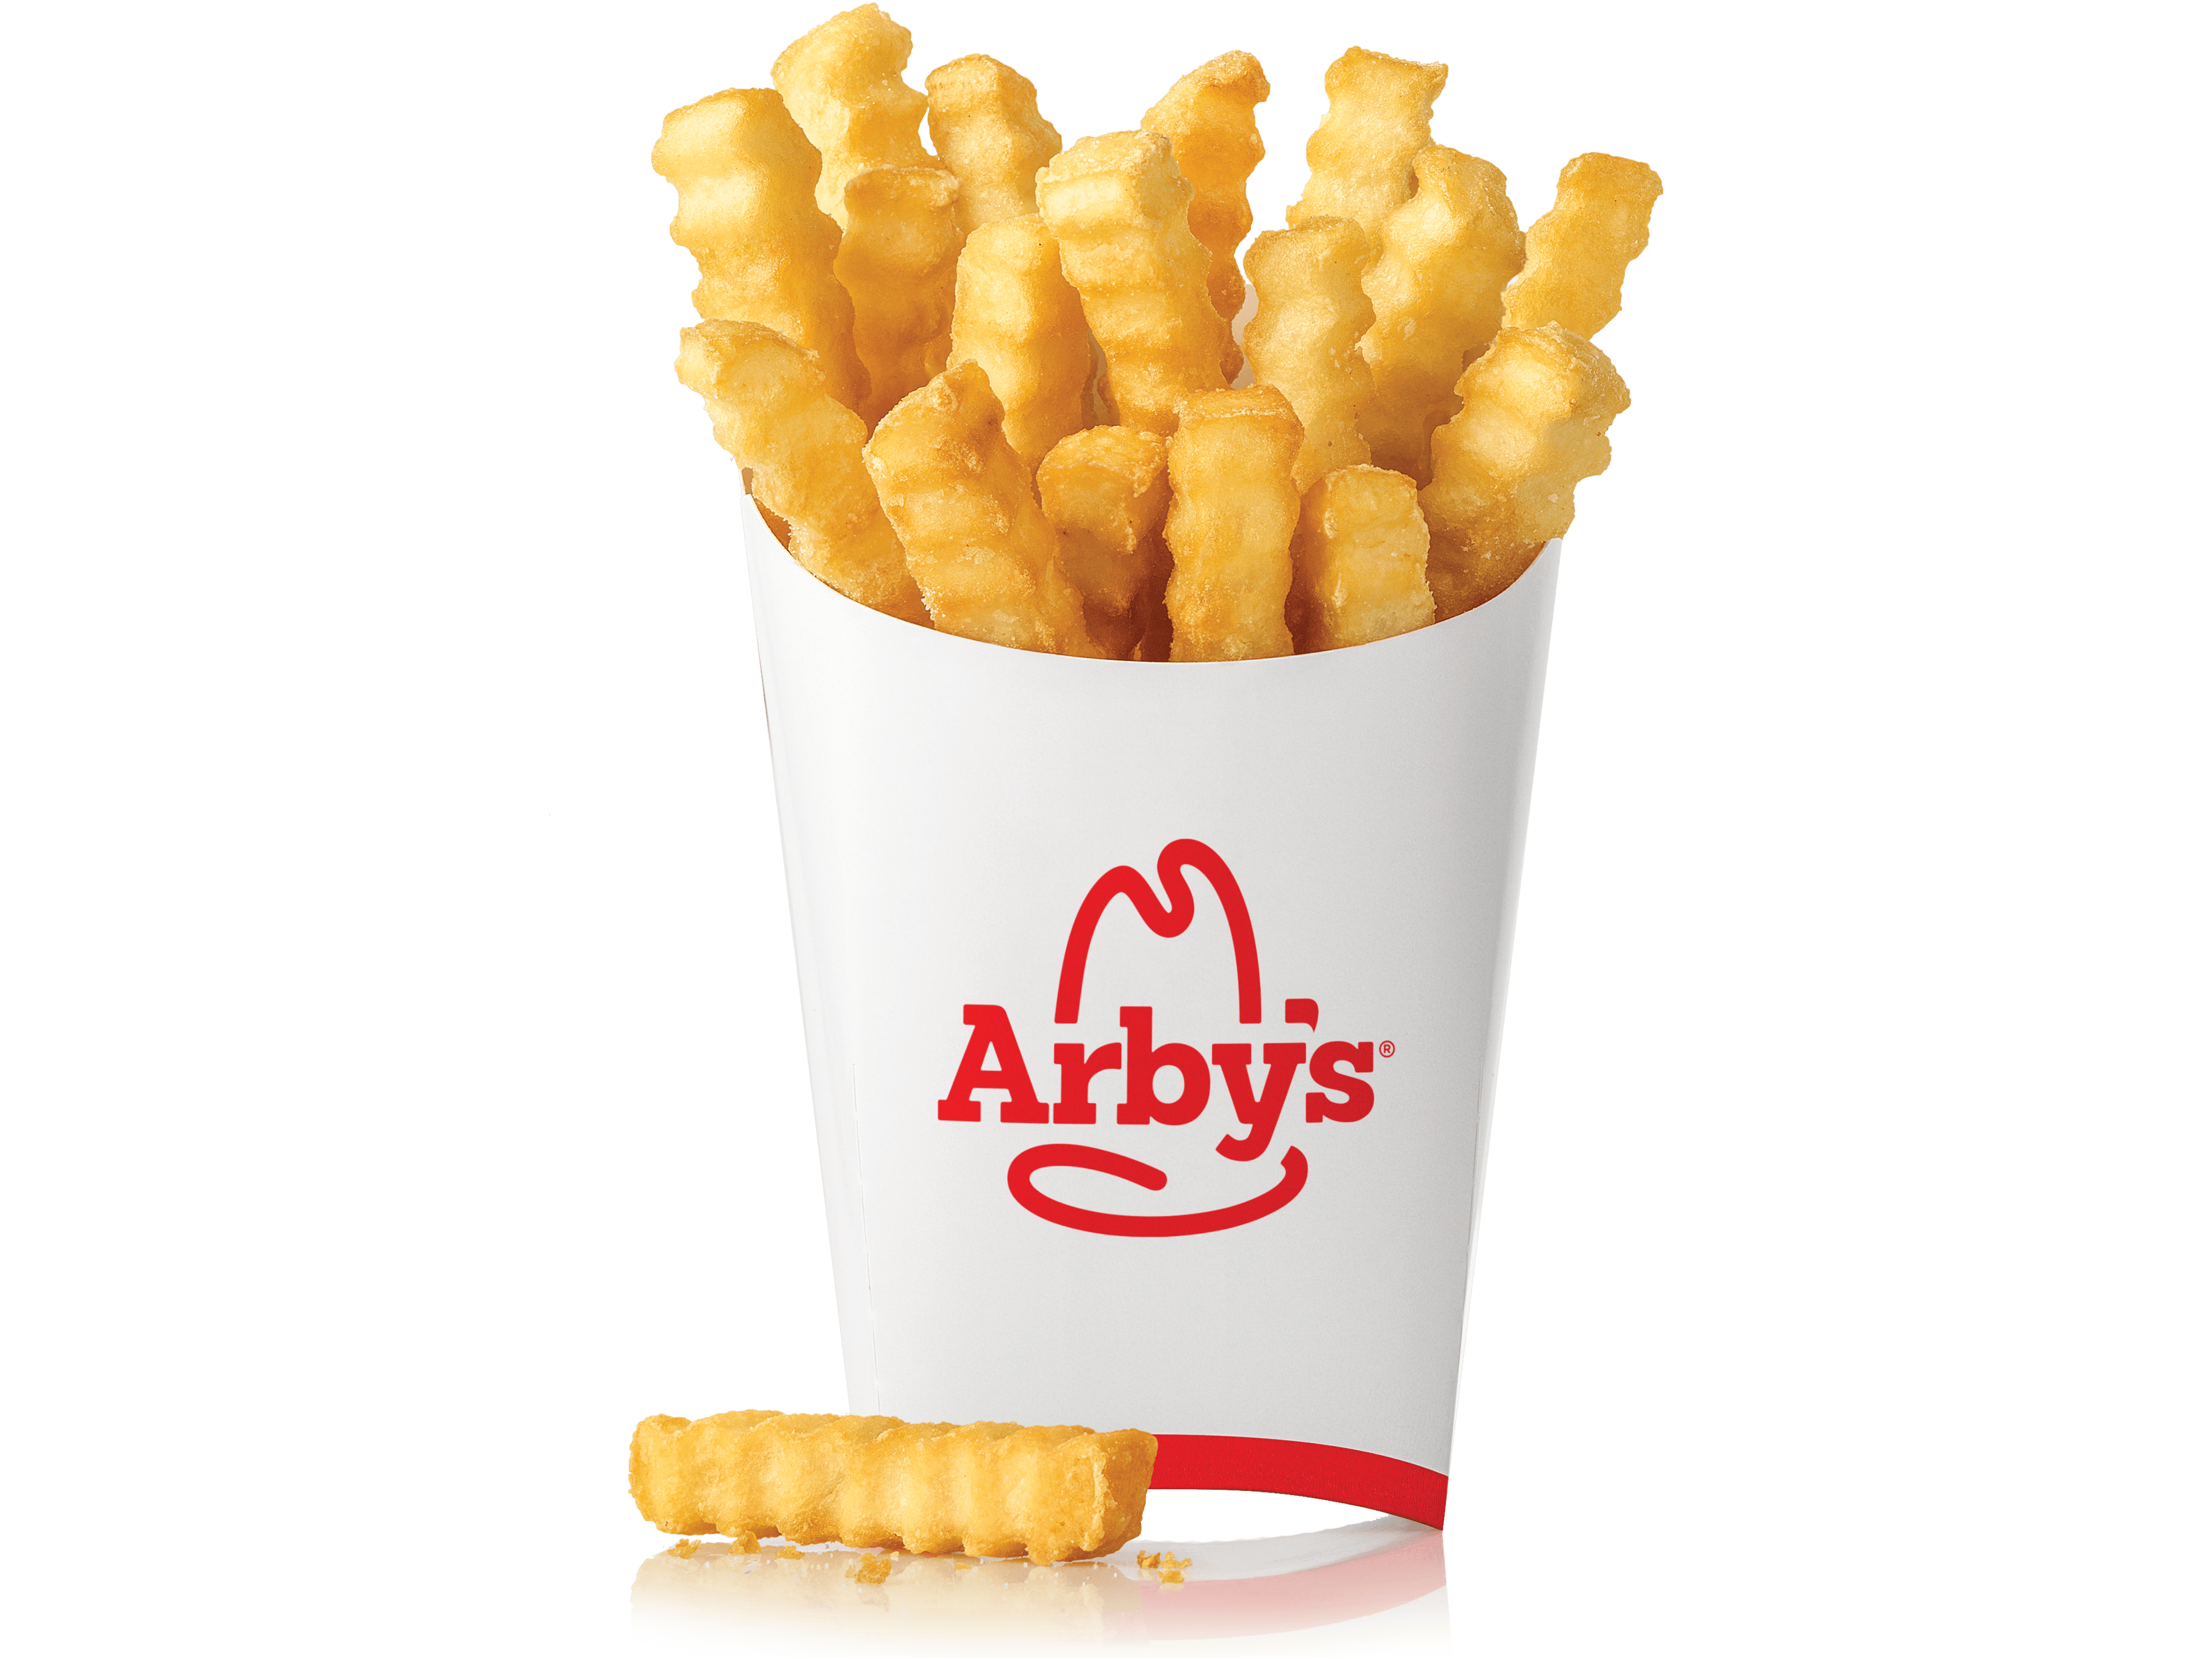 Arby's Crinkle Fries Nutrition Facts